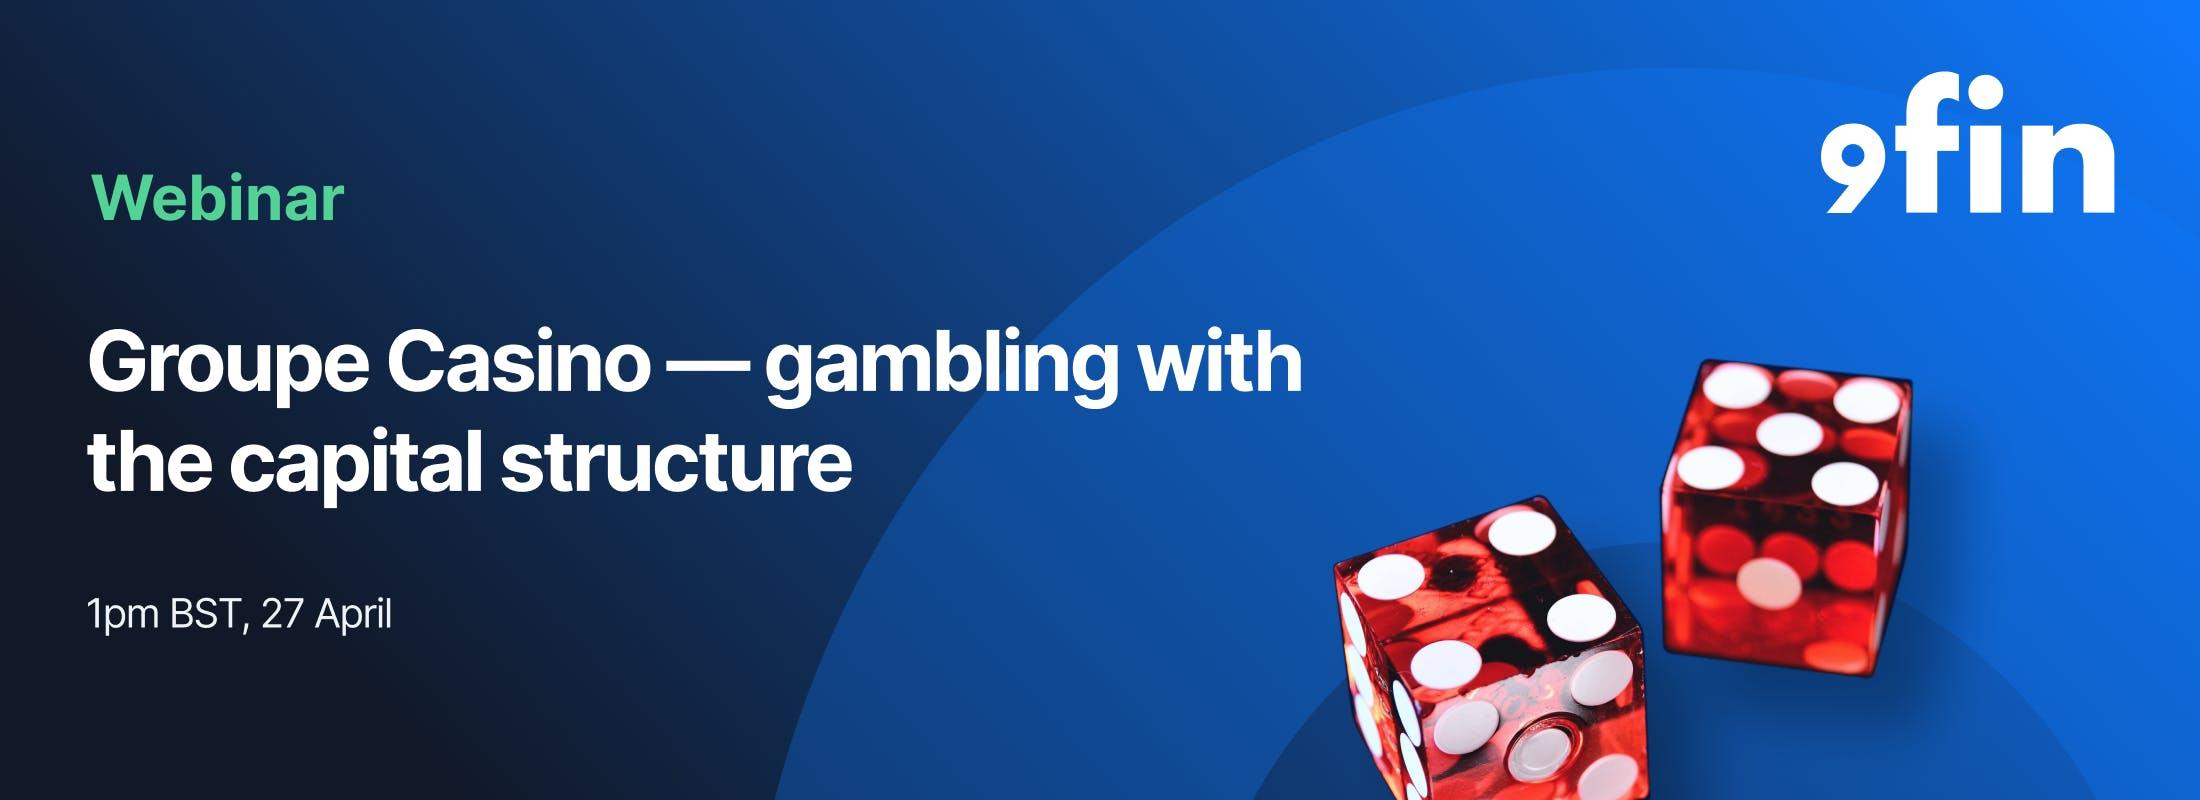 Groupe Casino — gambling with the capital structure